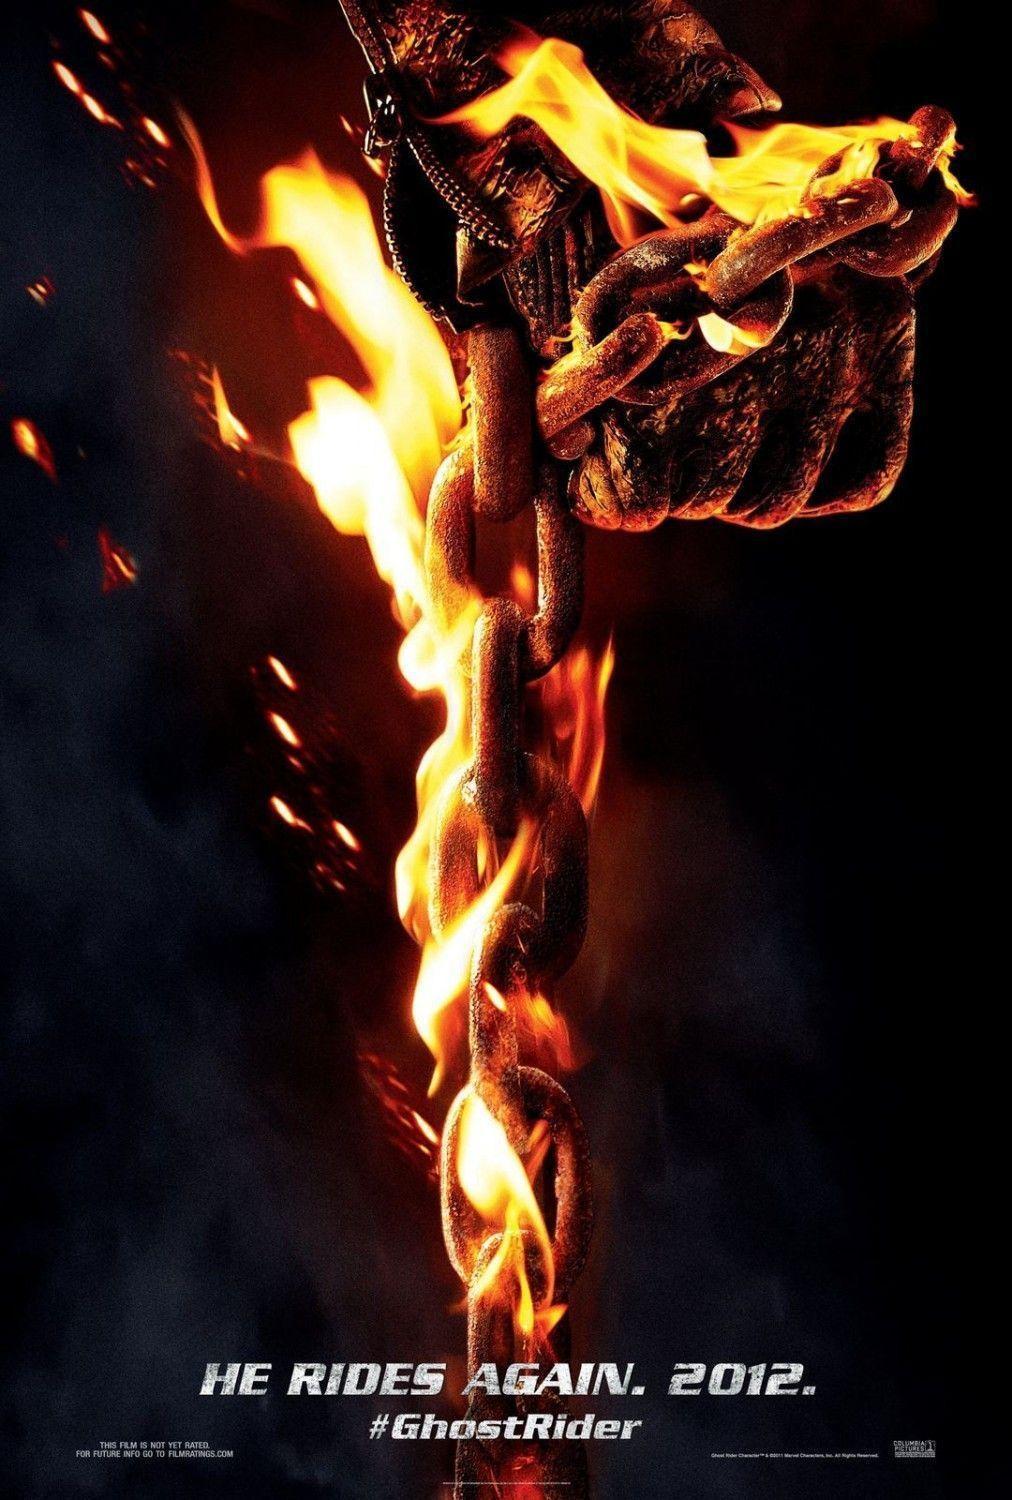 GHOST RIDER 3 News from Nicolas Cage; Says It&;s Possible &;But it